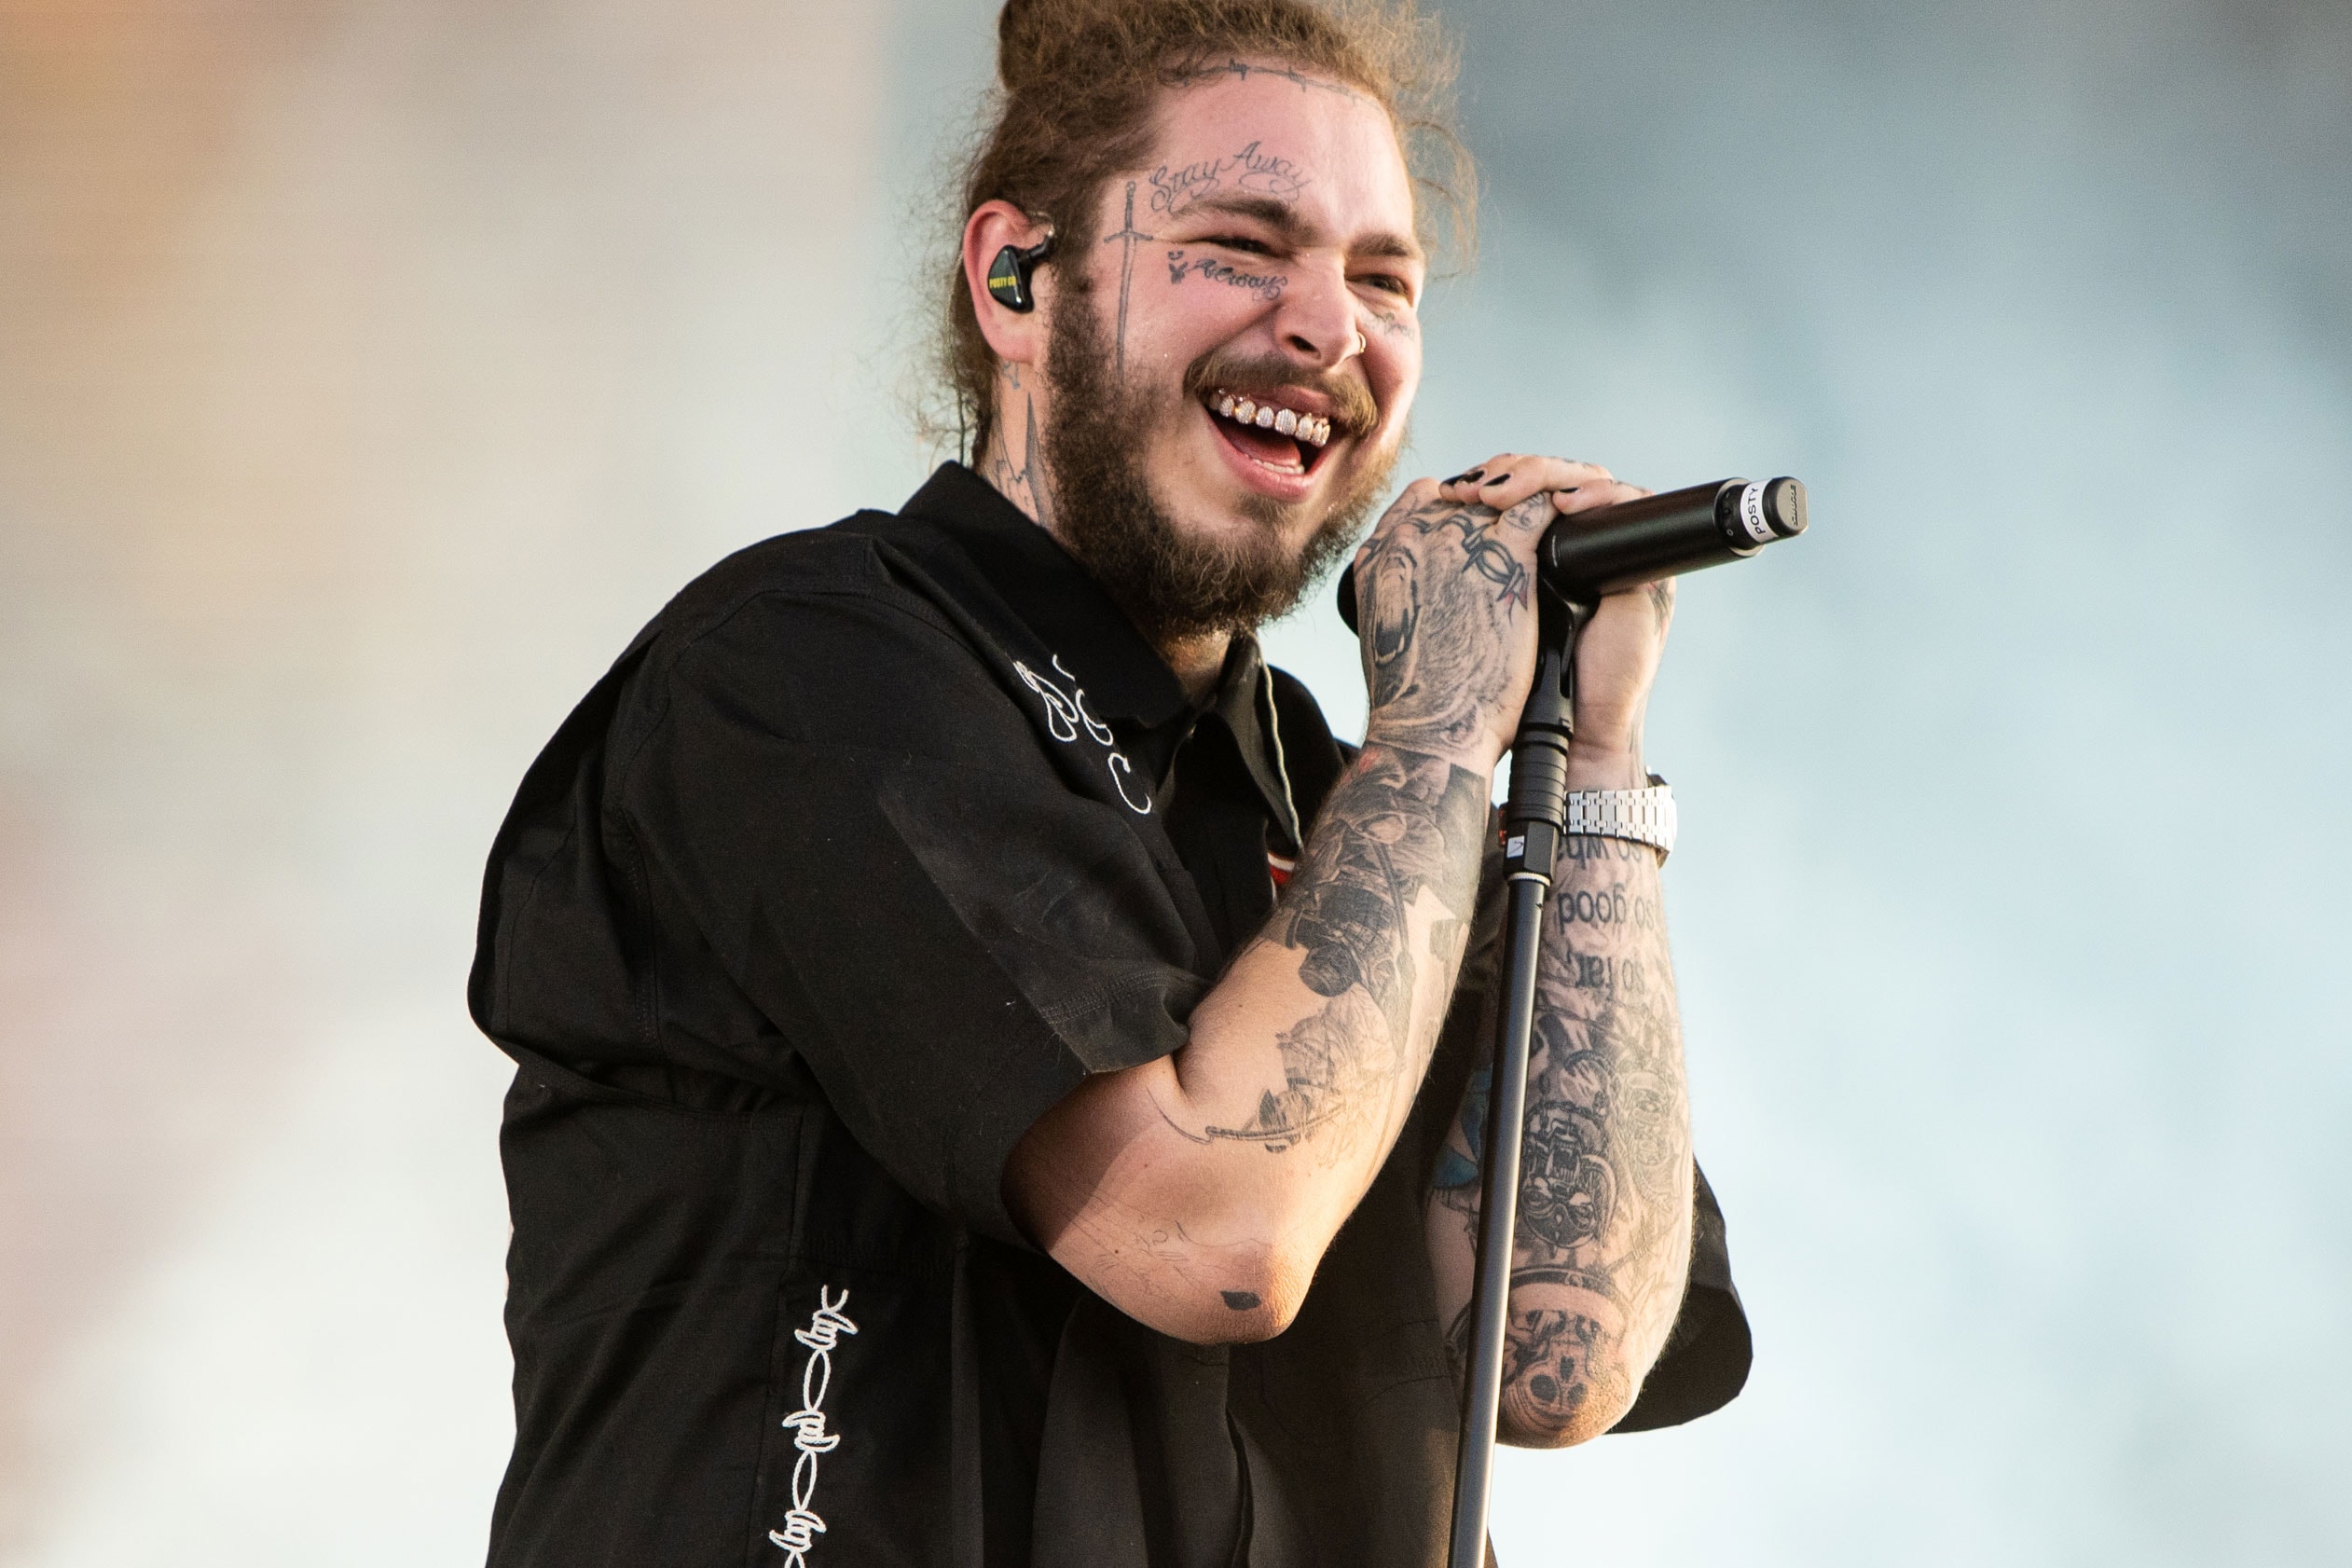 Post Malone Teases New Collabs for Upcoming Album 'Twelve Carat Toothache' doja cat roddy ricch the kid laroi robin pecknold instagram live rapper r&b